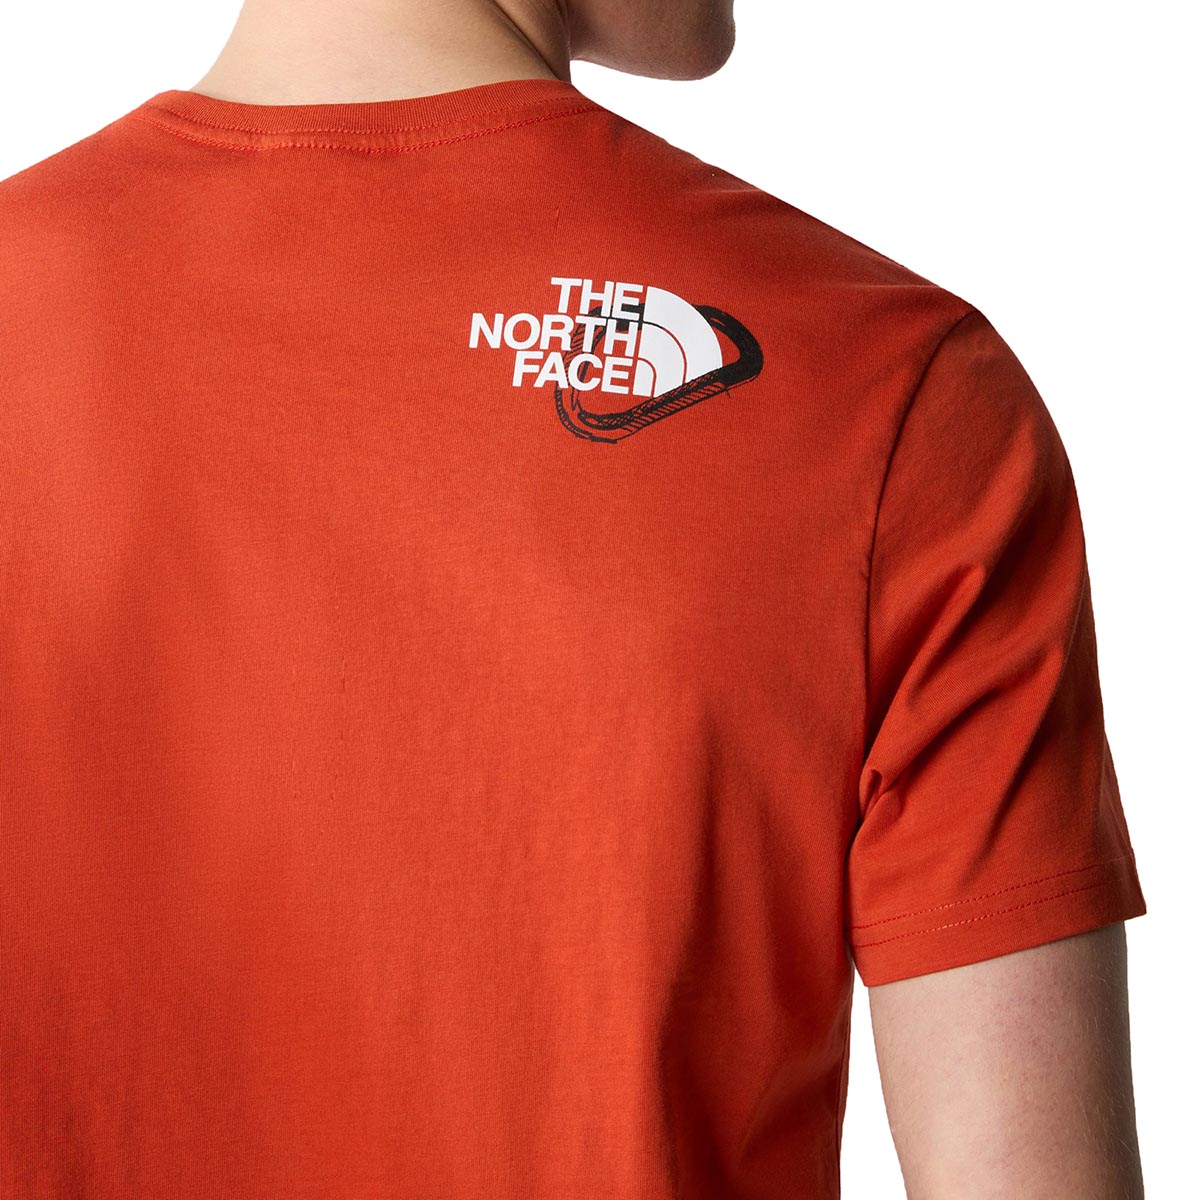 THE NORTH FACE - OUTDOOR GRAPHIC T-SHIRT